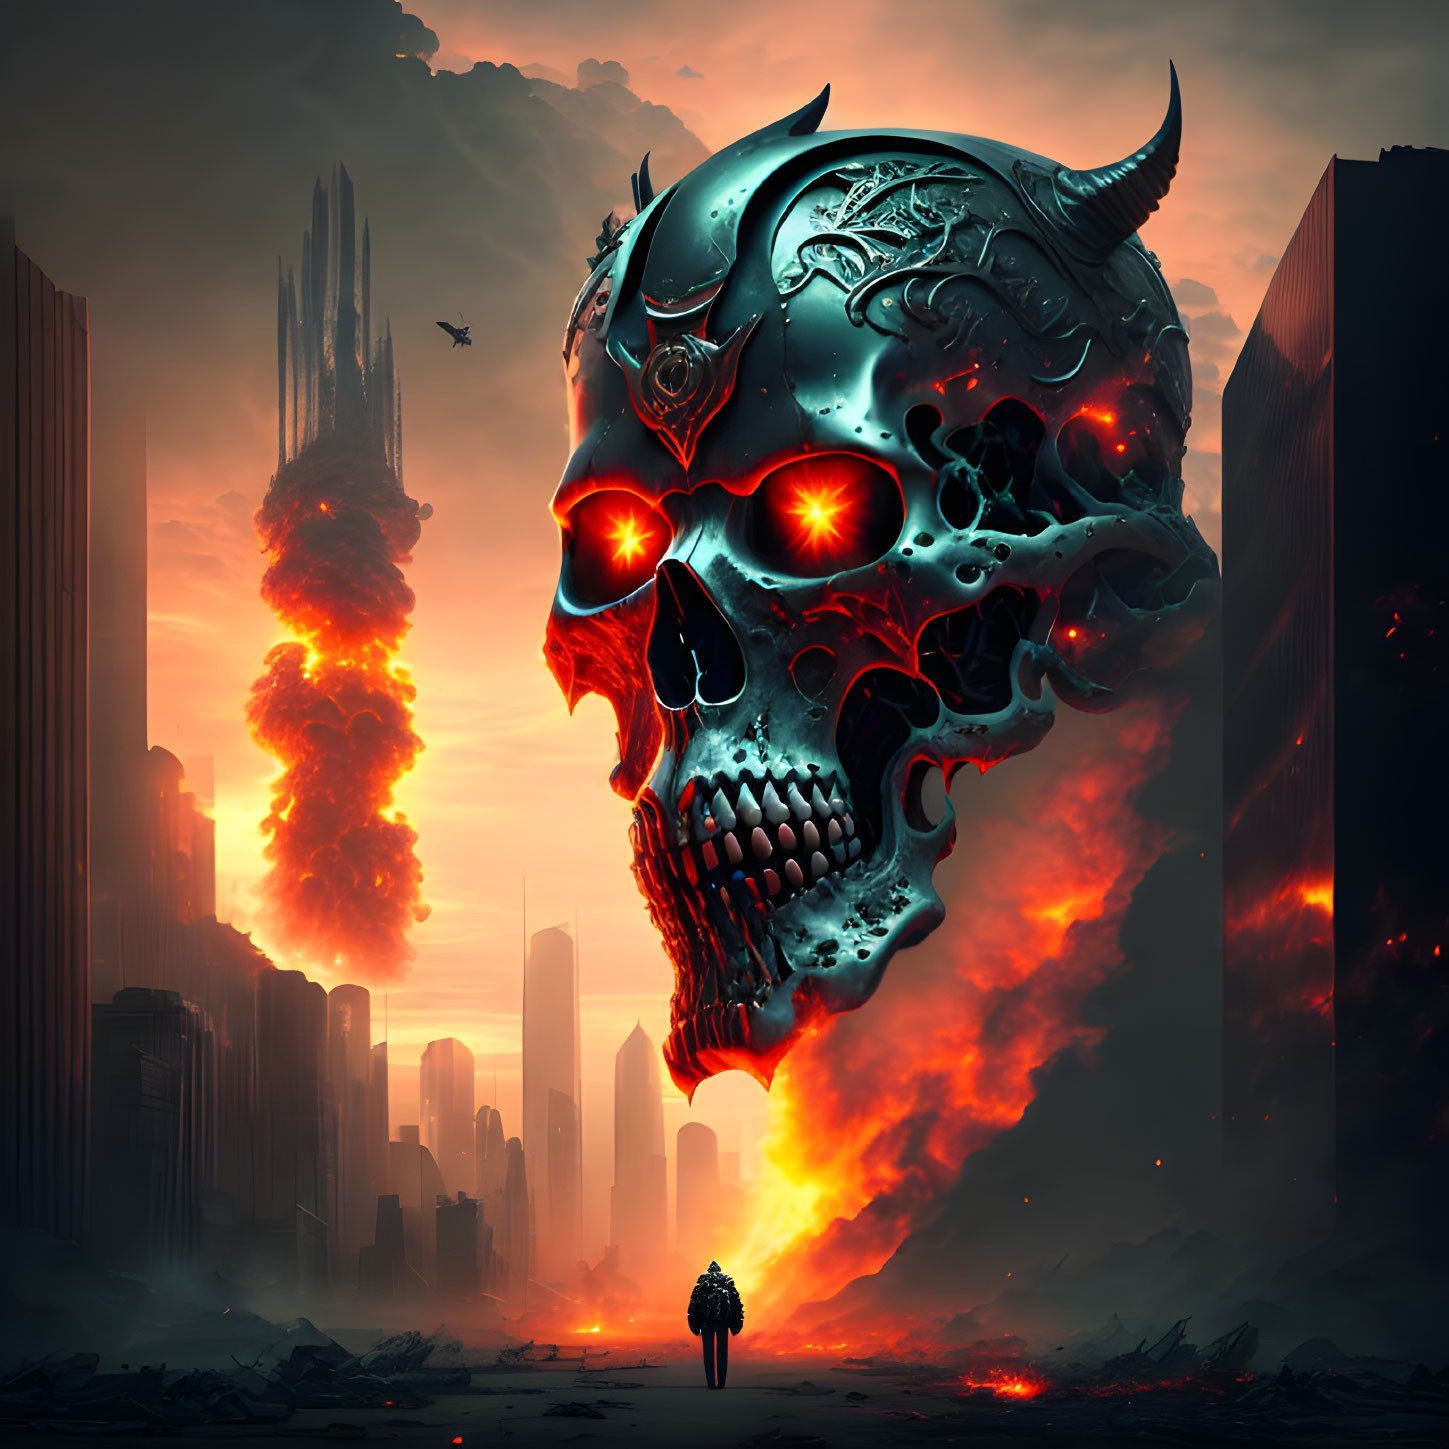 Dystopian cityscape with giant flaming skull and lone figure in futuristic setting